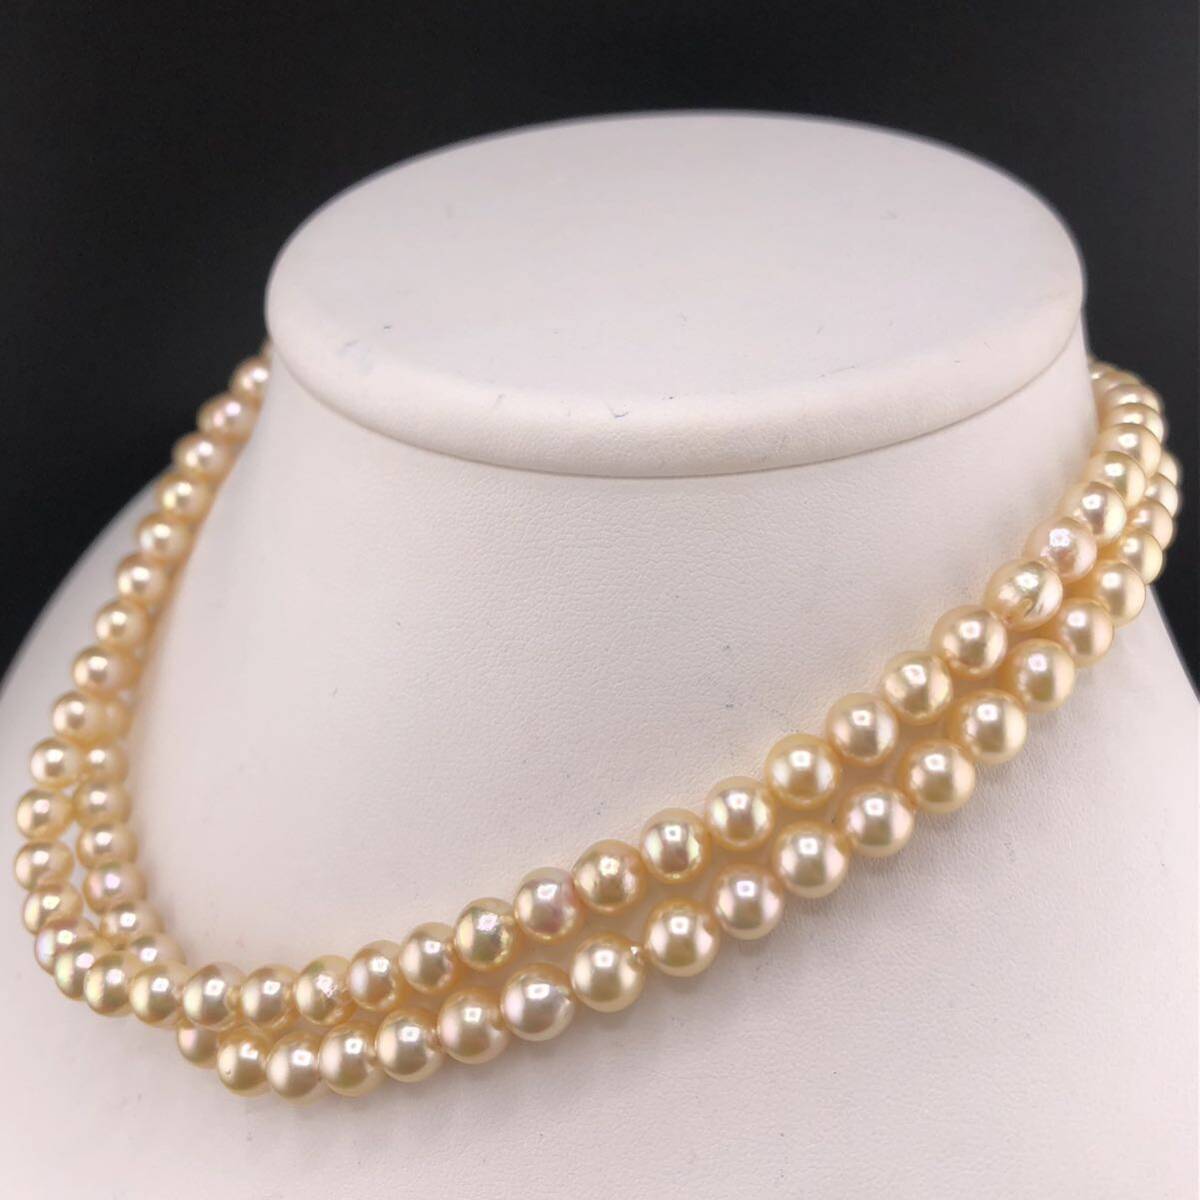 P04-0052 2連☆パールネックレス 6.5mm~7.0mm 約40cm 53.9g ( Pearl necklace SILVER )_画像2